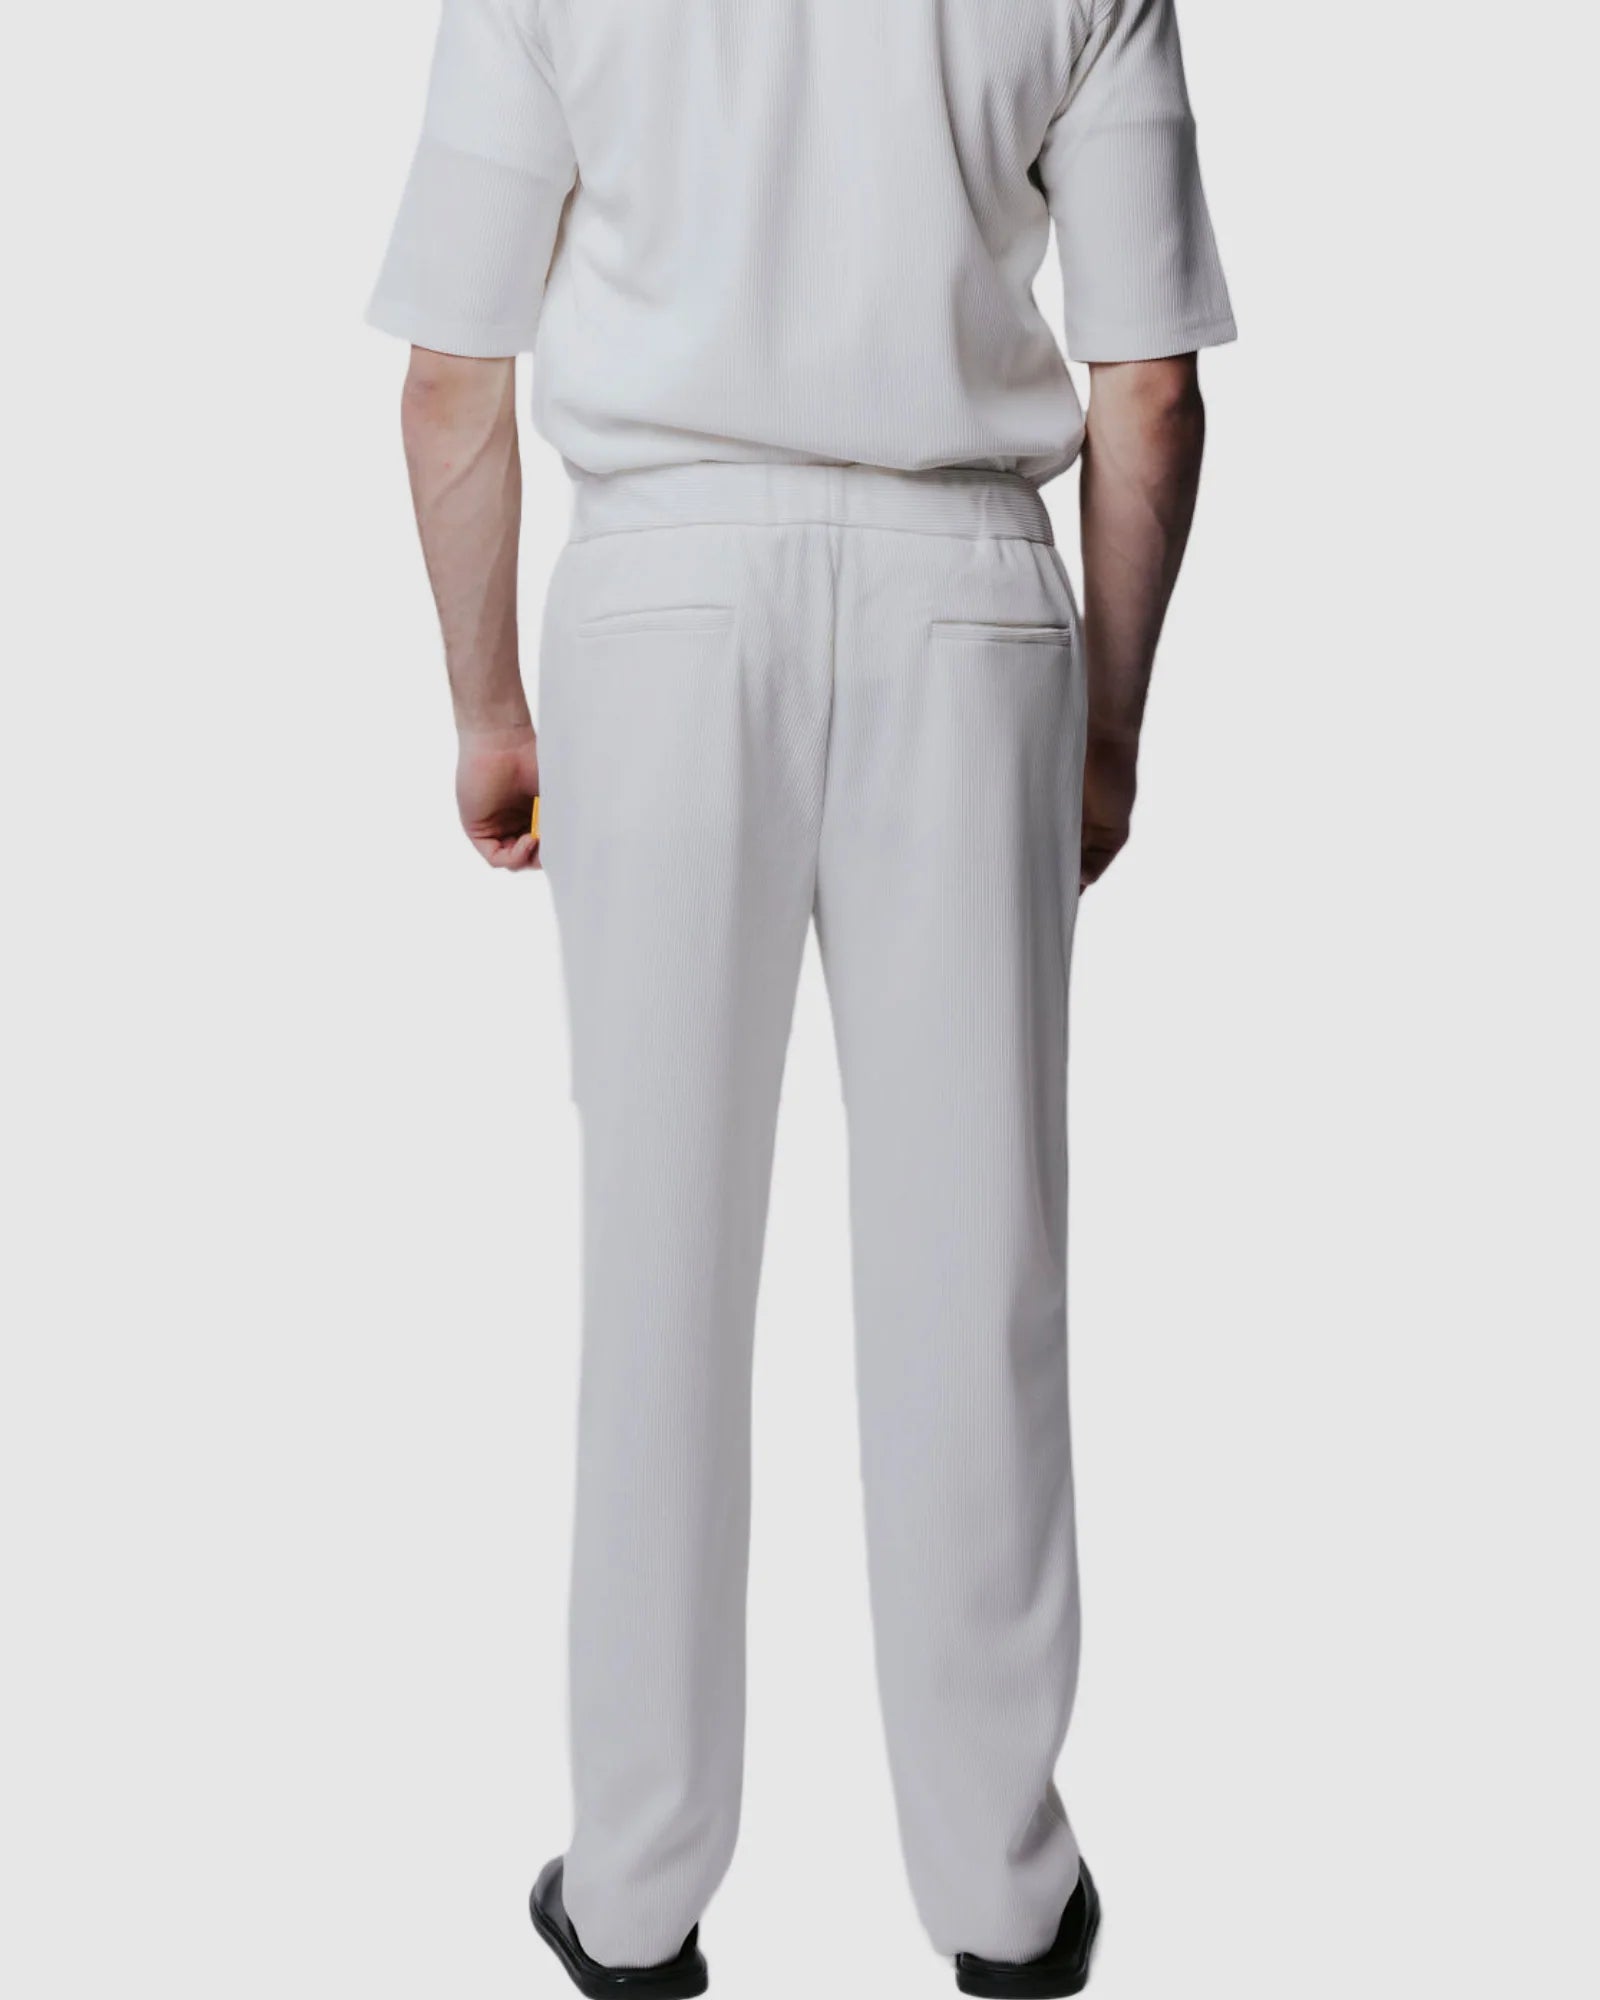 Justin Cassin Abade Pleated Pants in White Color 3